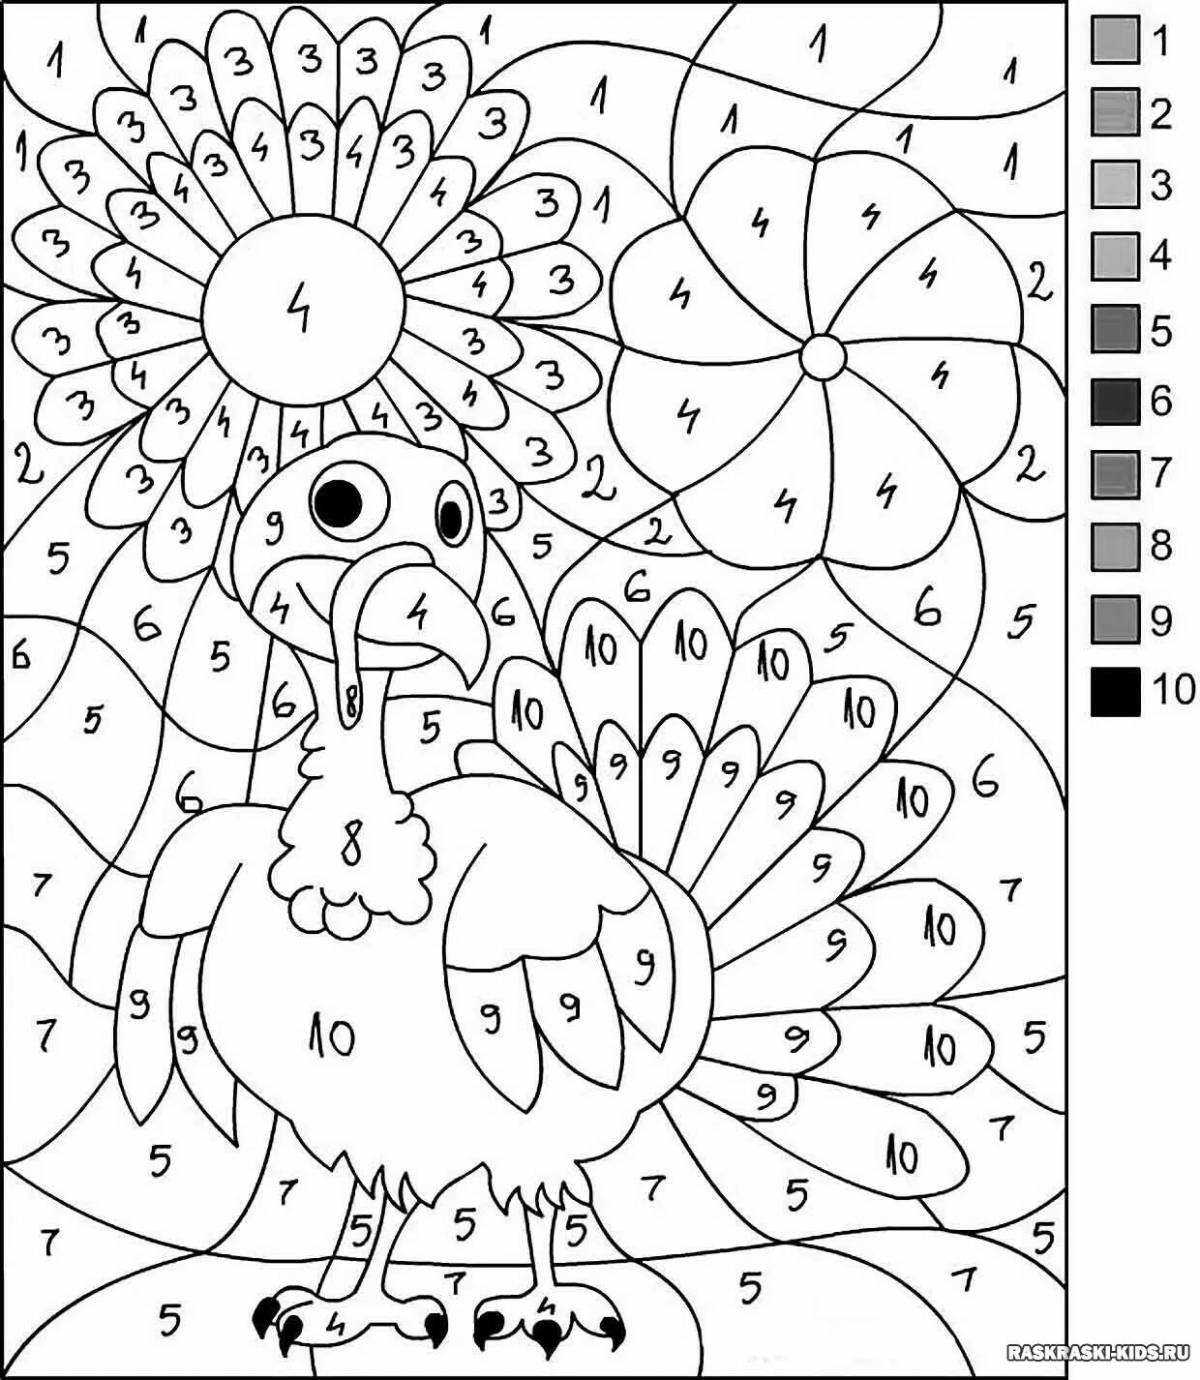 Fascinating coloring book for kids with colored numbers